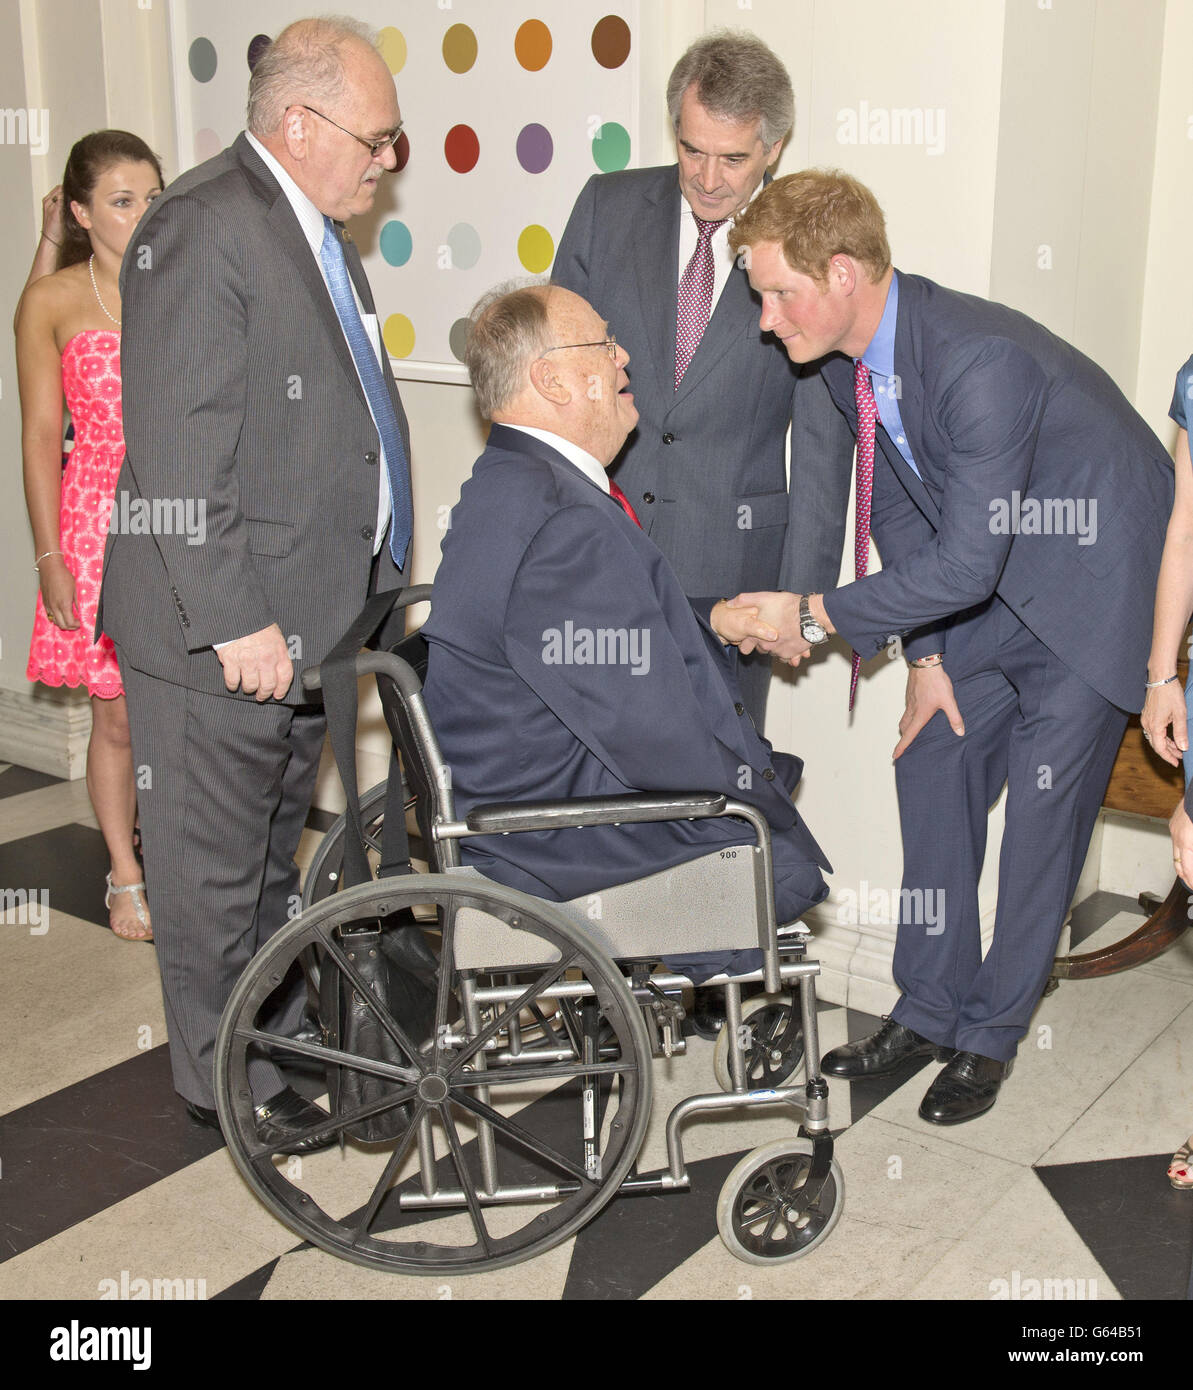 Prince Harry meets former Senator Max Cleland while greeting attendees before a reception and dinner at the British Ambassador's residence in Washington DC, on the first day of his seven-day visit to the United States. Stock Photo